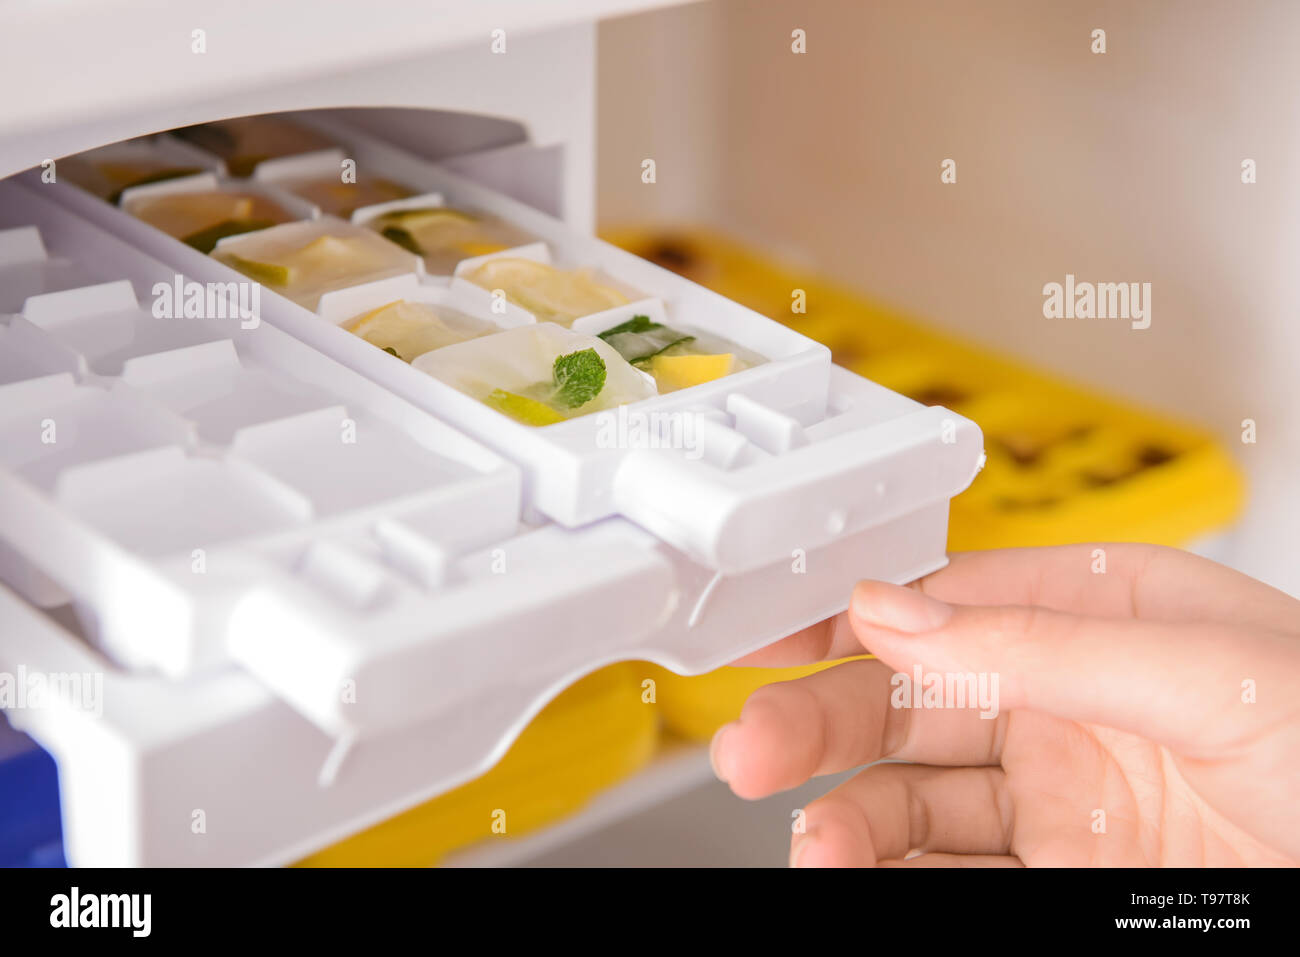 https://c8.alamy.com/comp/T97T8K/woman-putting-tray-with-citrus-fruits-frozen-in-ice-cubes-into-refrigerator-T97T8K.jpg